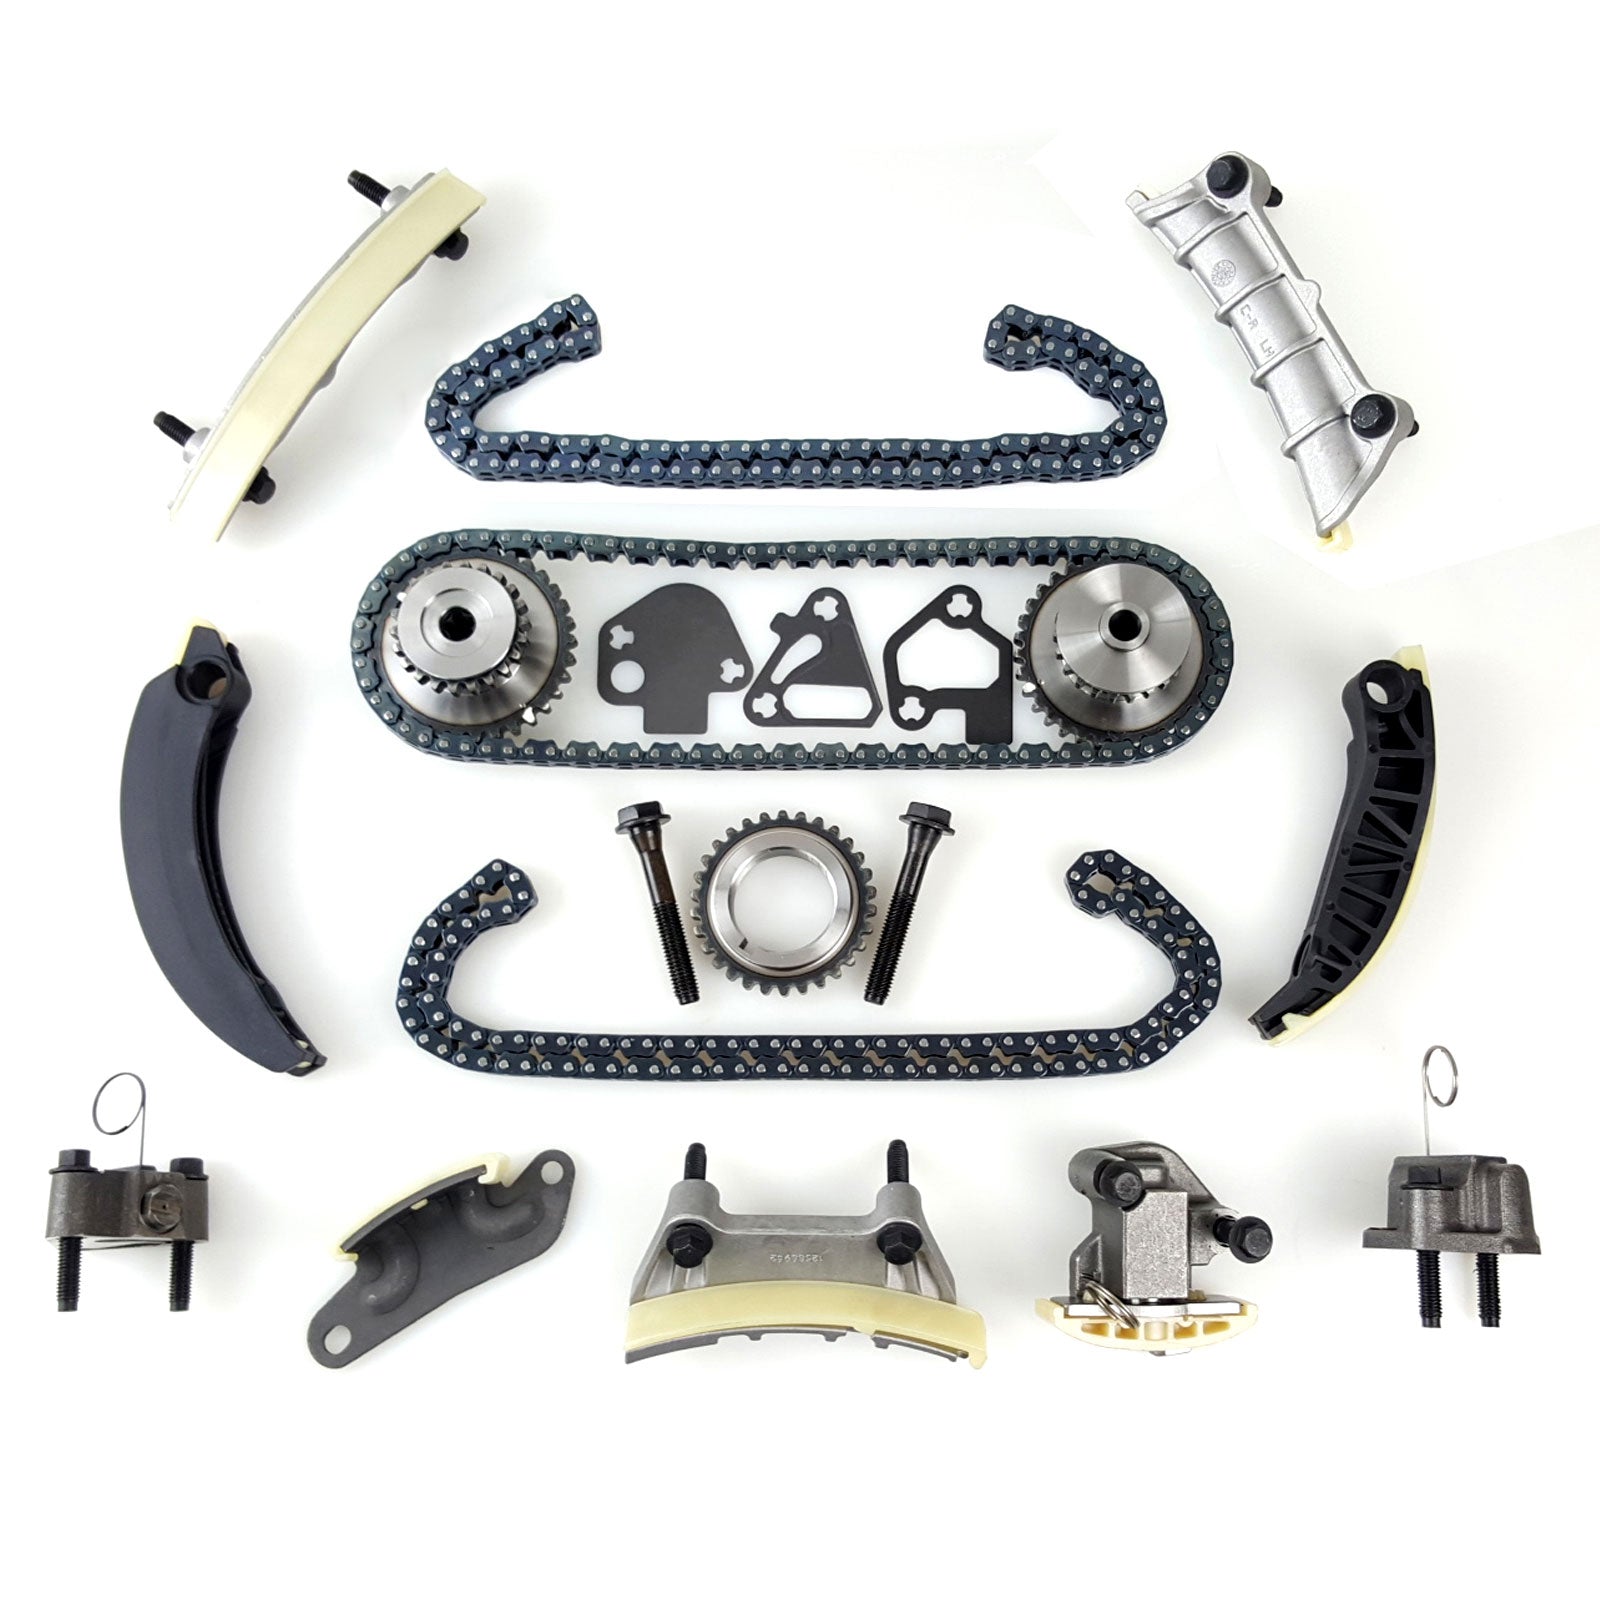 Holden Captiva CG 2006-2018 Timing Chain Kit and Gears 3.0L & 3.2L